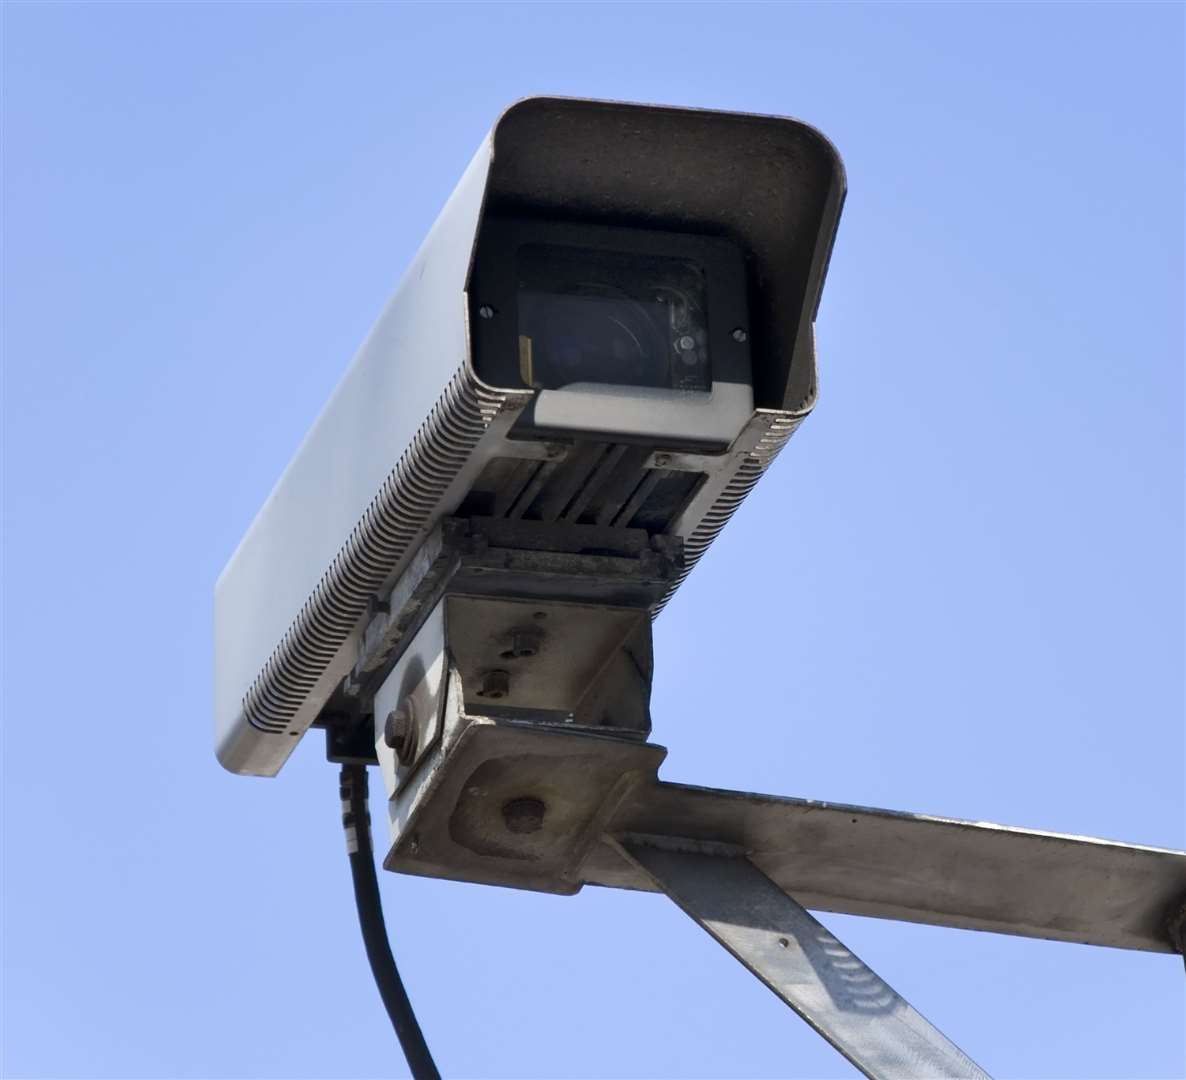 Thomas was being monitored by CCTV operators in Folkestone. Stock picture: Thinkstock Image Library